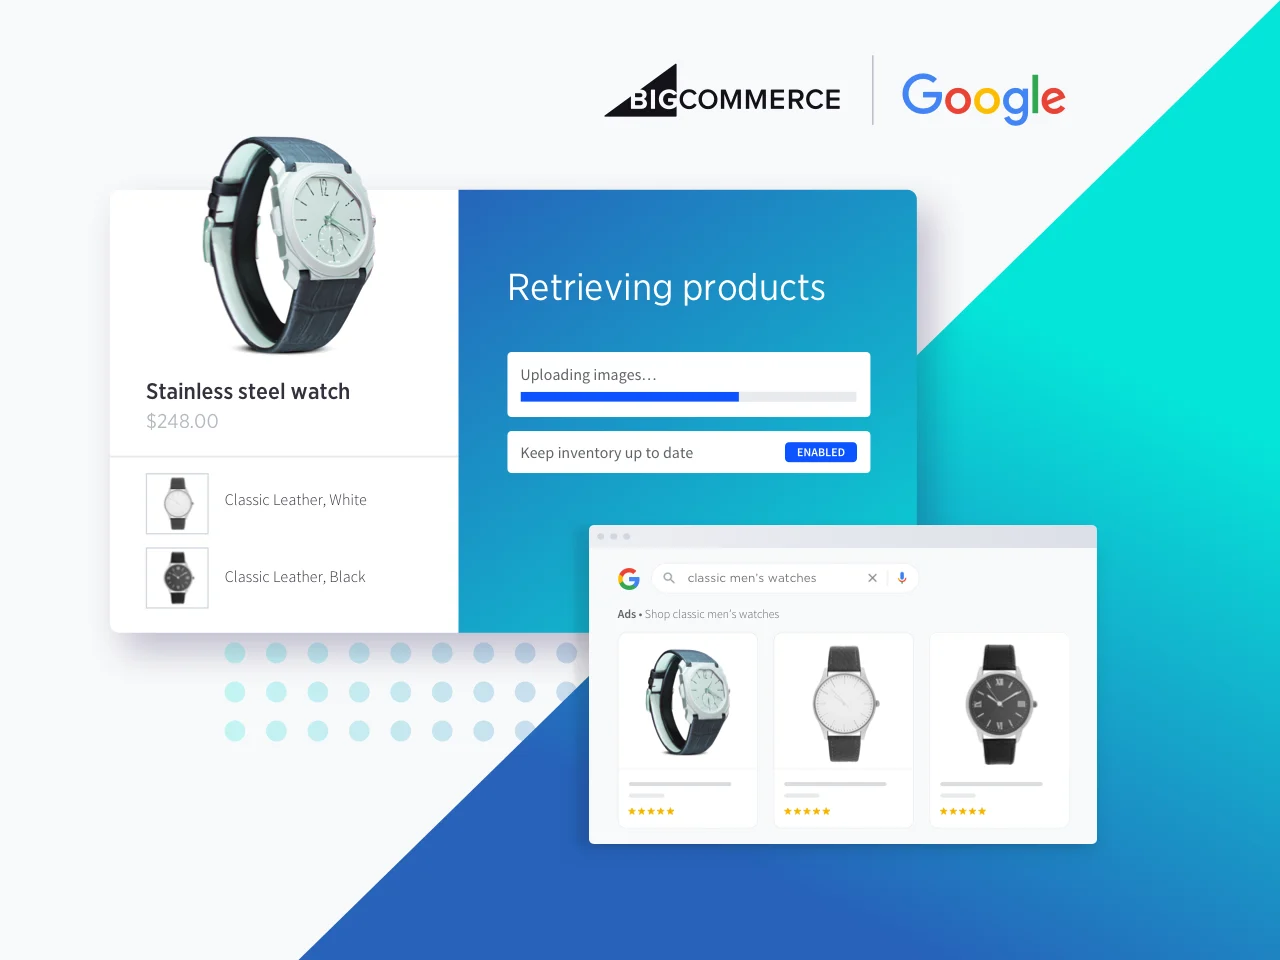 https://www-cdn.bigcommerce.com/assets/Ads-and-Listings-on-Google-1280-x-960-px.png?mtime=20211020114617